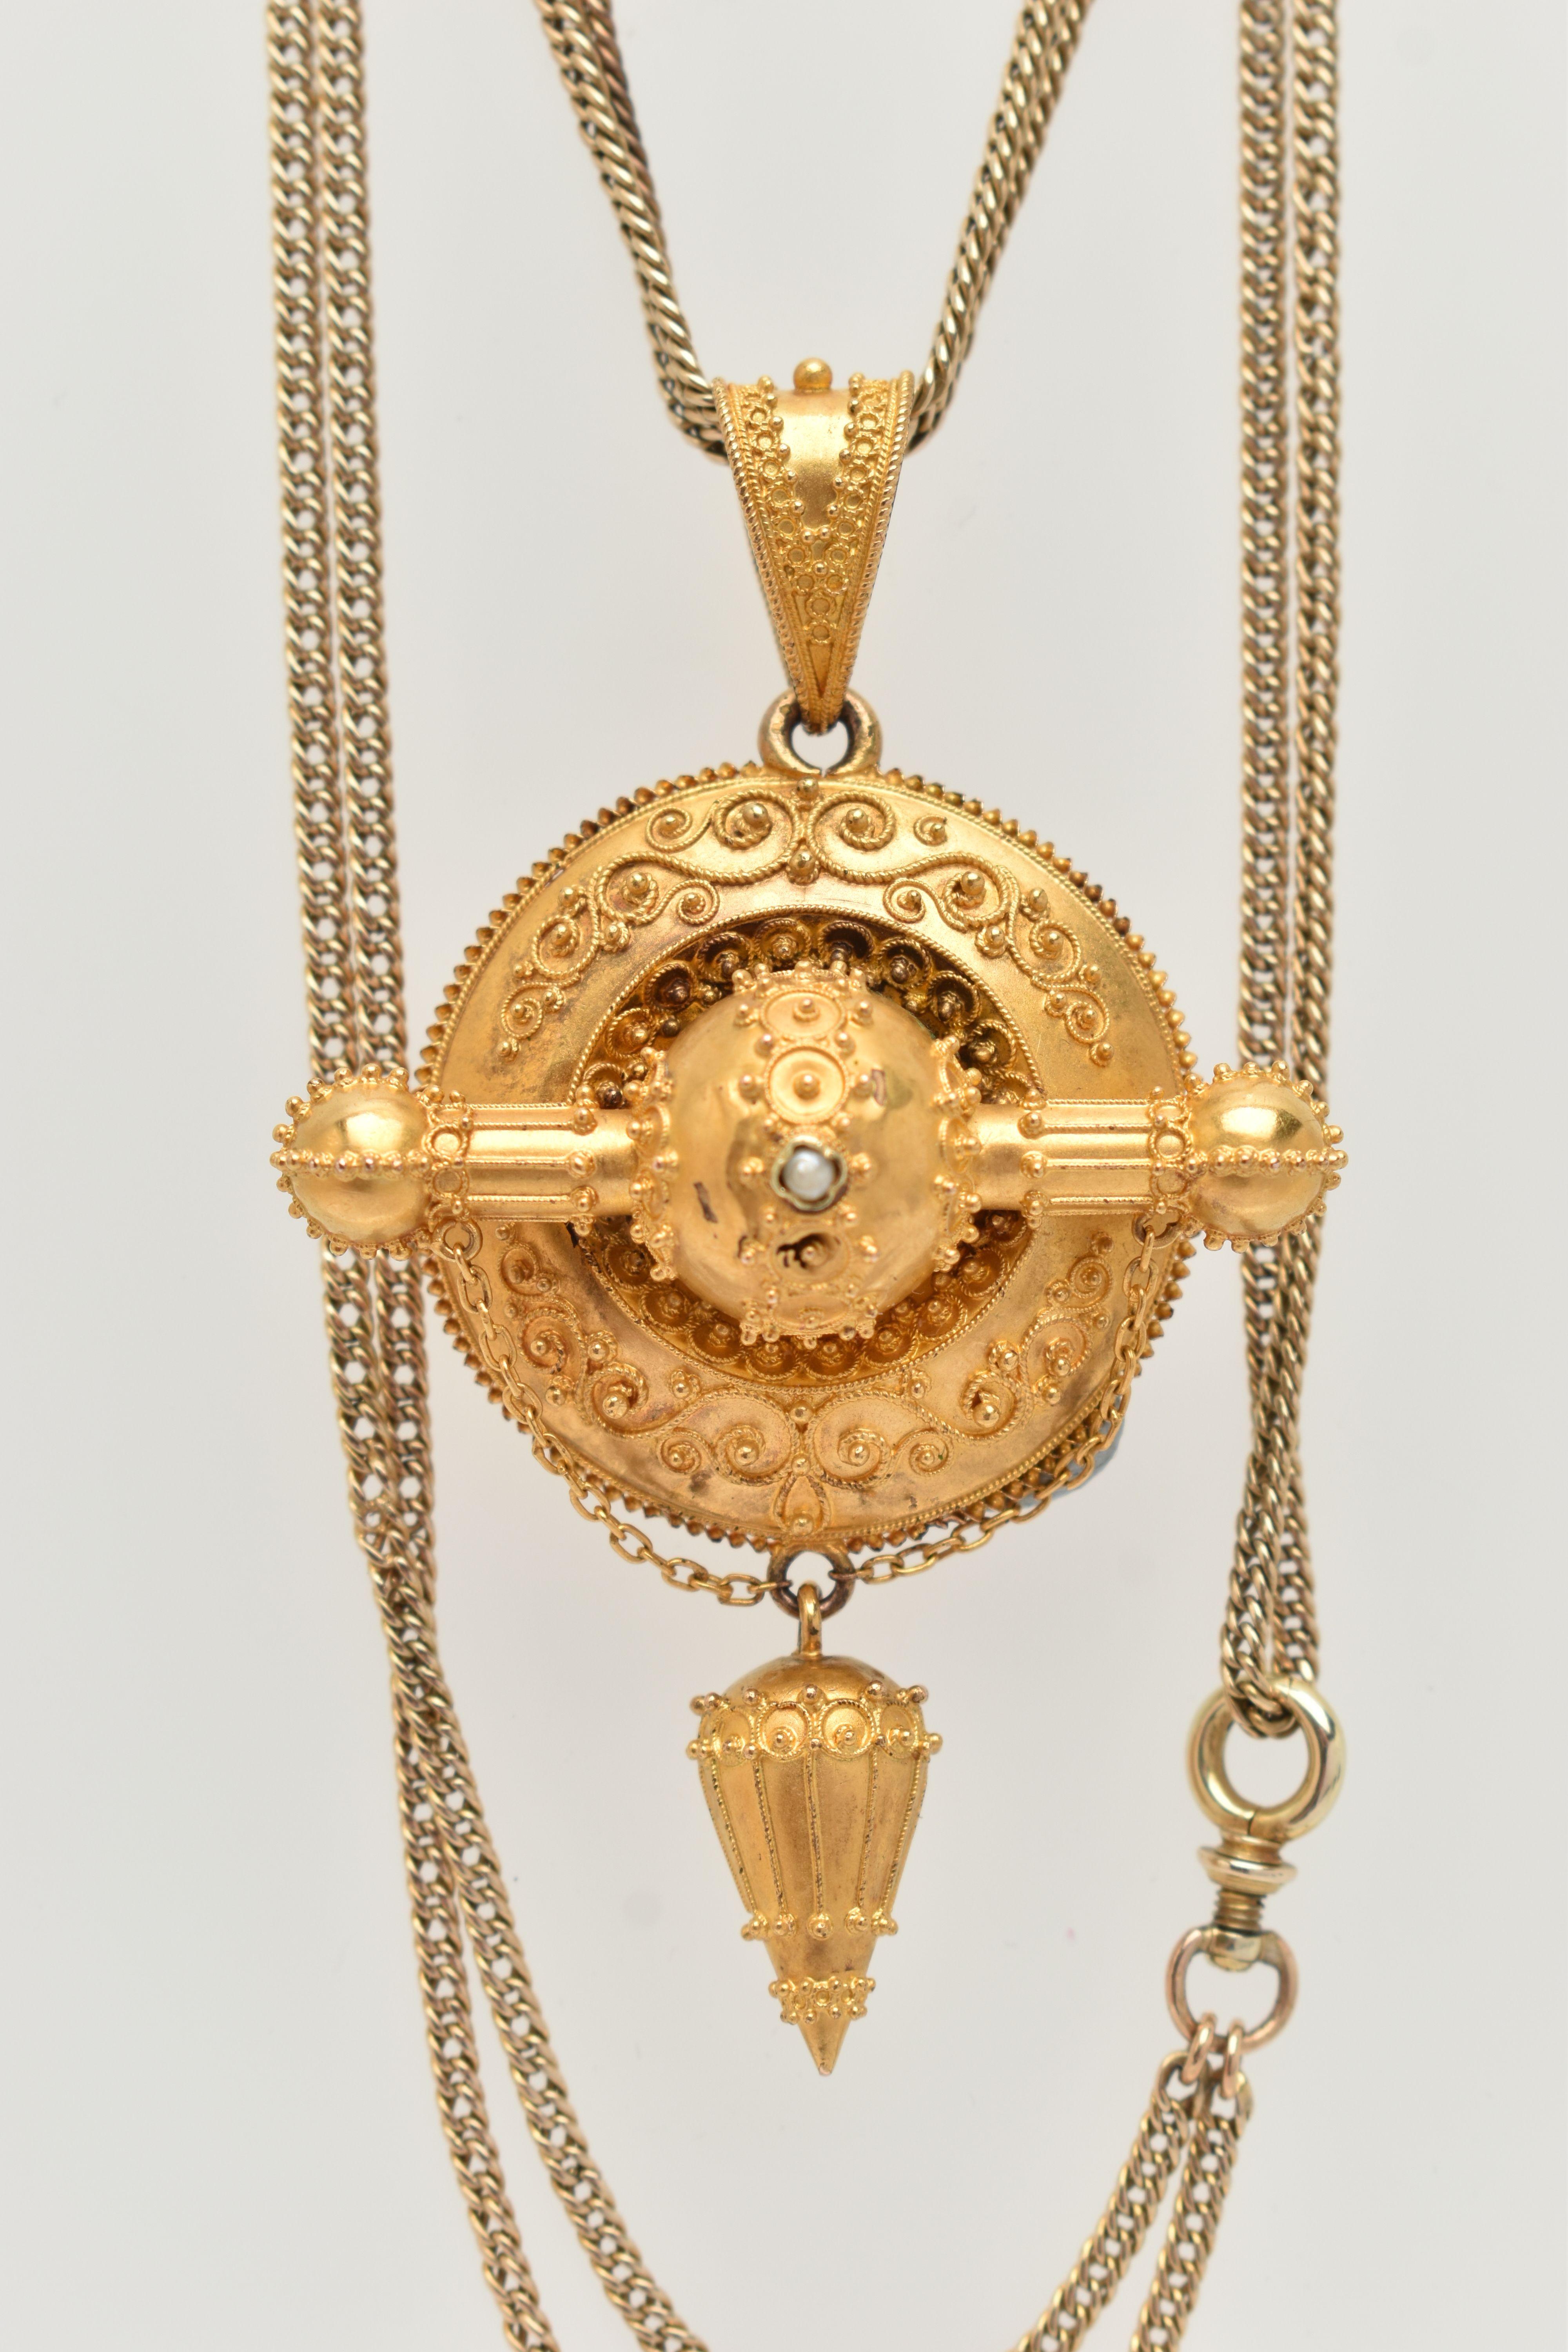 A LATE GEORGIAN/EARLY VICTORIAN PENDANT, of circular outline with cannetille detail, central seed